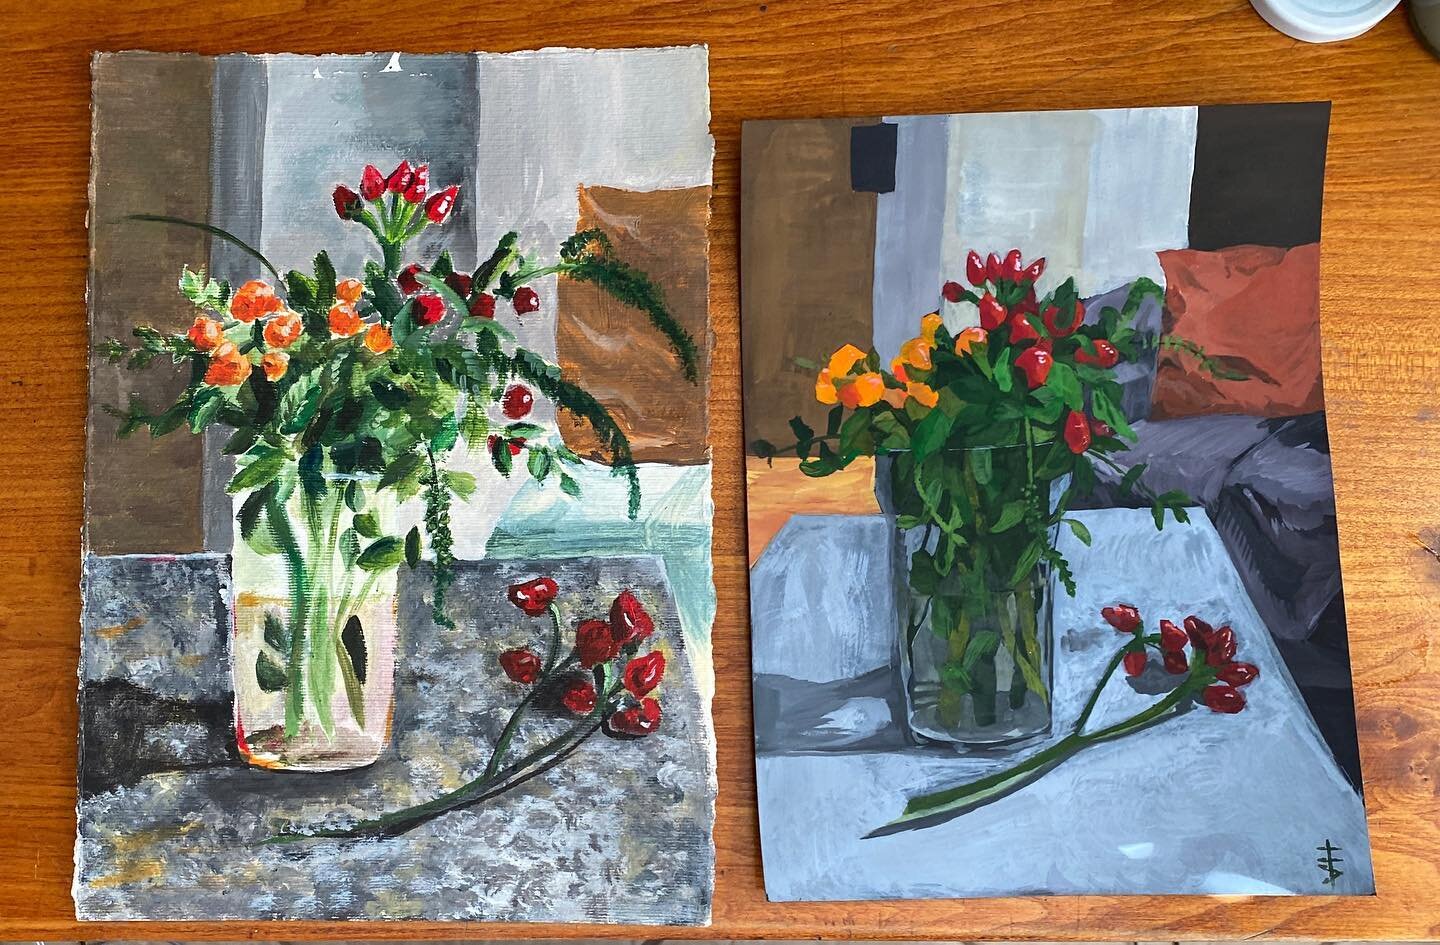 I painted this gorgeous little pepper and mint still life (left) from my first week living in Italy fall of 2017. I wanted to capture the feeling of new beginnings and quiet anticipation for the year ahead.  Fast forward to this year, I found the ref